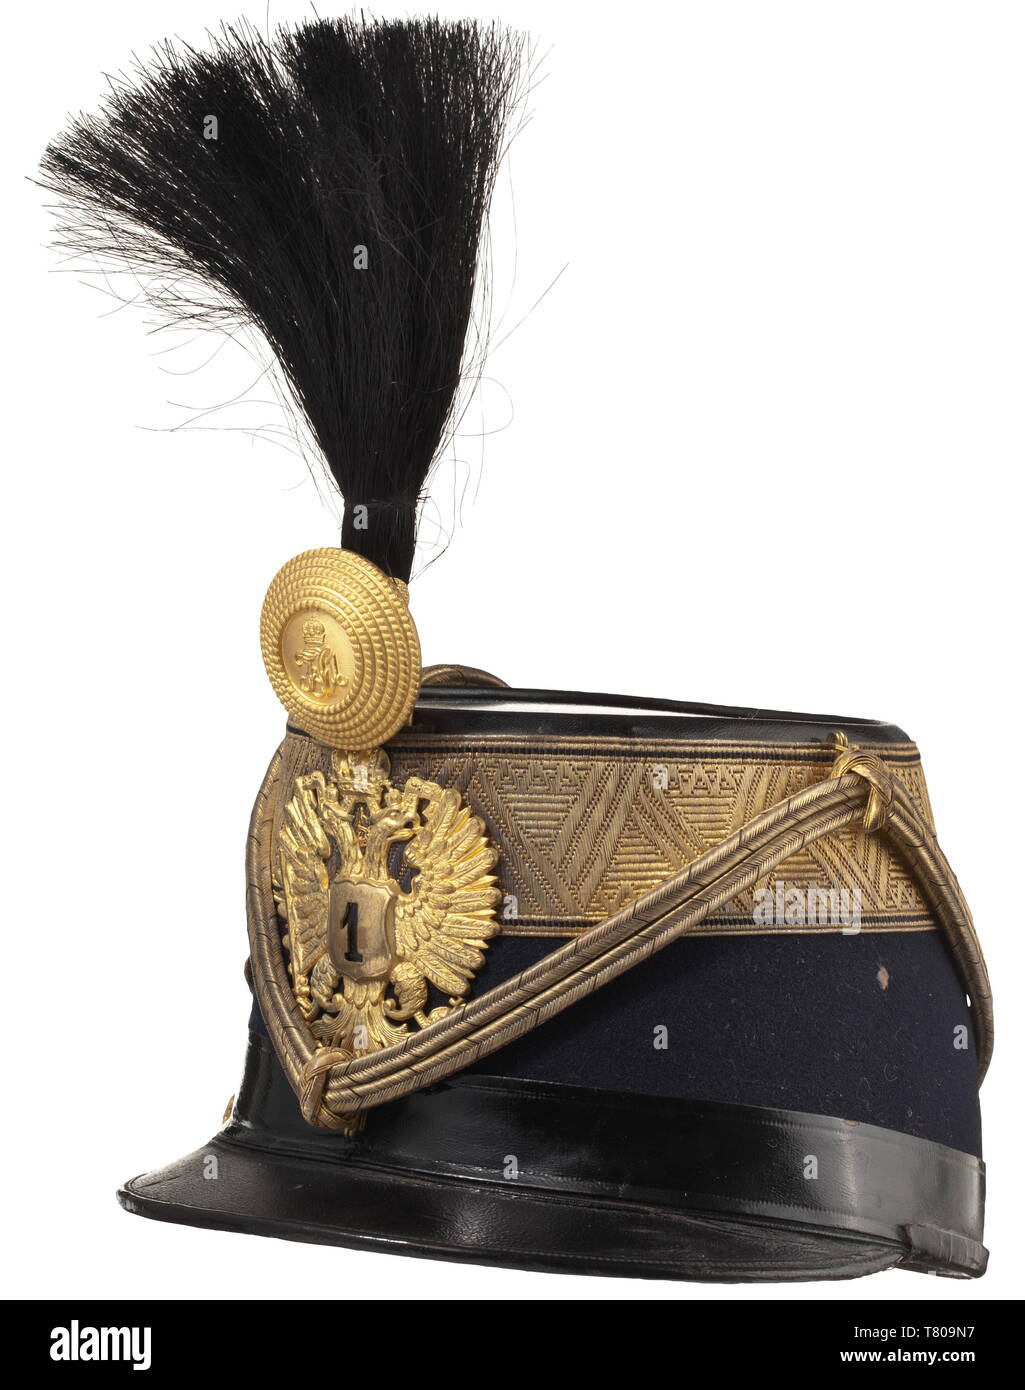 Otto von Habsburg (1912 - 2011) - a shako as Colonel of the Royal and Imperial Hussar Regiment no. 1 The body of dark blue (the regimental colour) cloth with wide gold edges, the double-headed eagle with '1' coat of arms, black horsehair bush, fire-gilt metal rose with initials 'FJ I', the 'Vitéz-Kötés' in finest issue with massively embroidered initials and double-headed eagle. The interior with a fine white silk liner and a crowned 'O' stamped in gold, black patent leather chin strap. The shako was a gift from Hussar Regiment no. 1, of the high, Additional-Rights-Clearance-Info-Not-Available Stock Photo